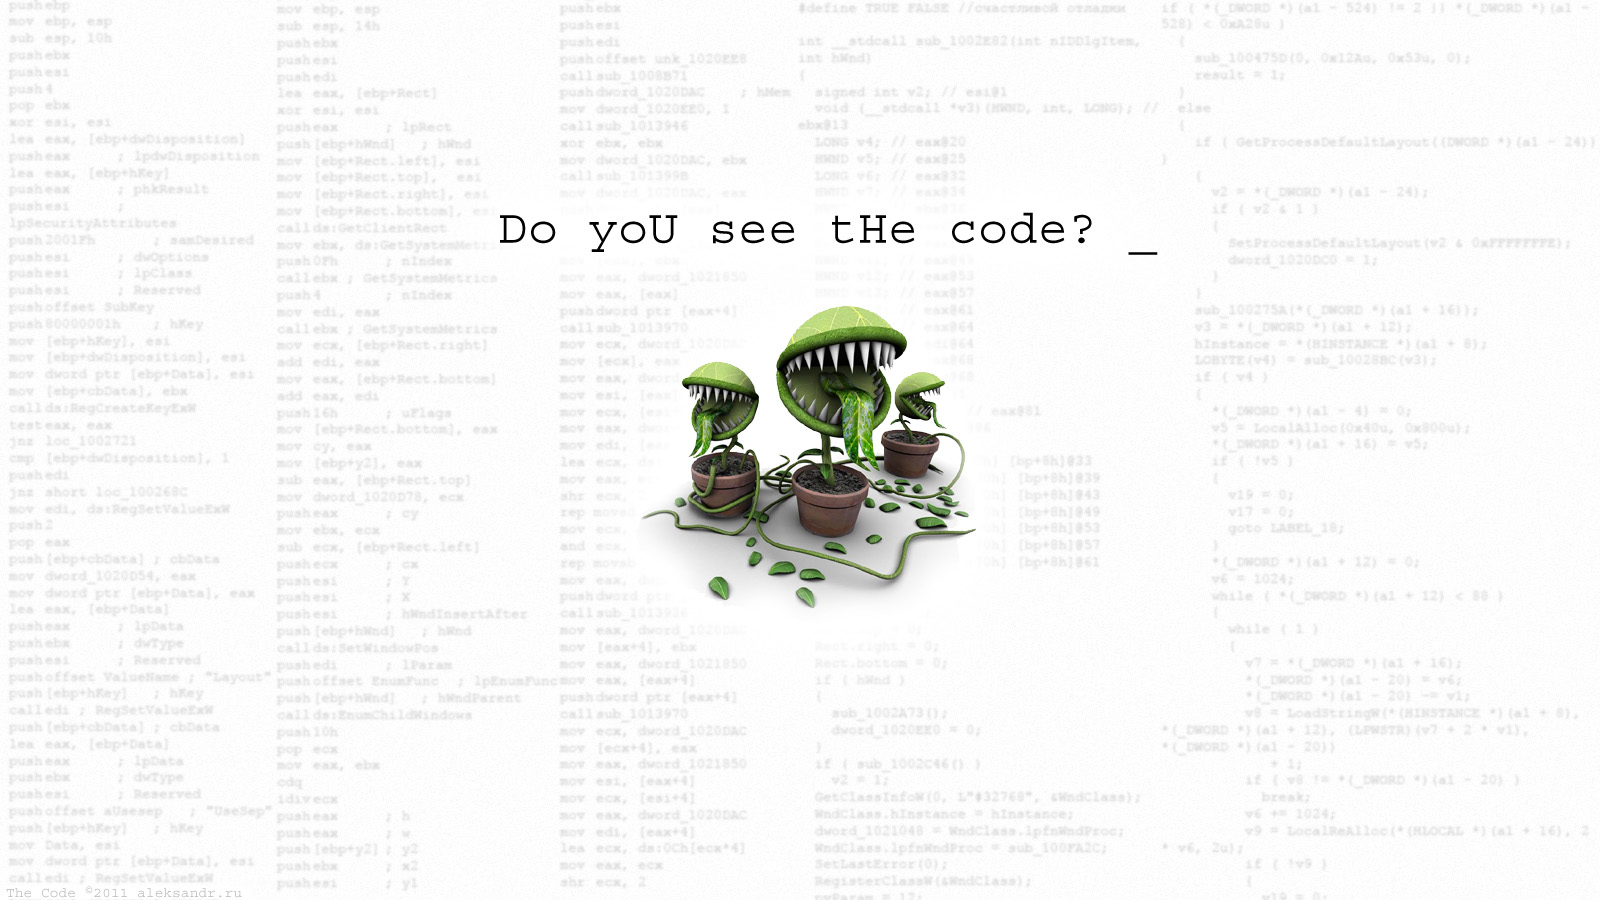 [2011] The Code